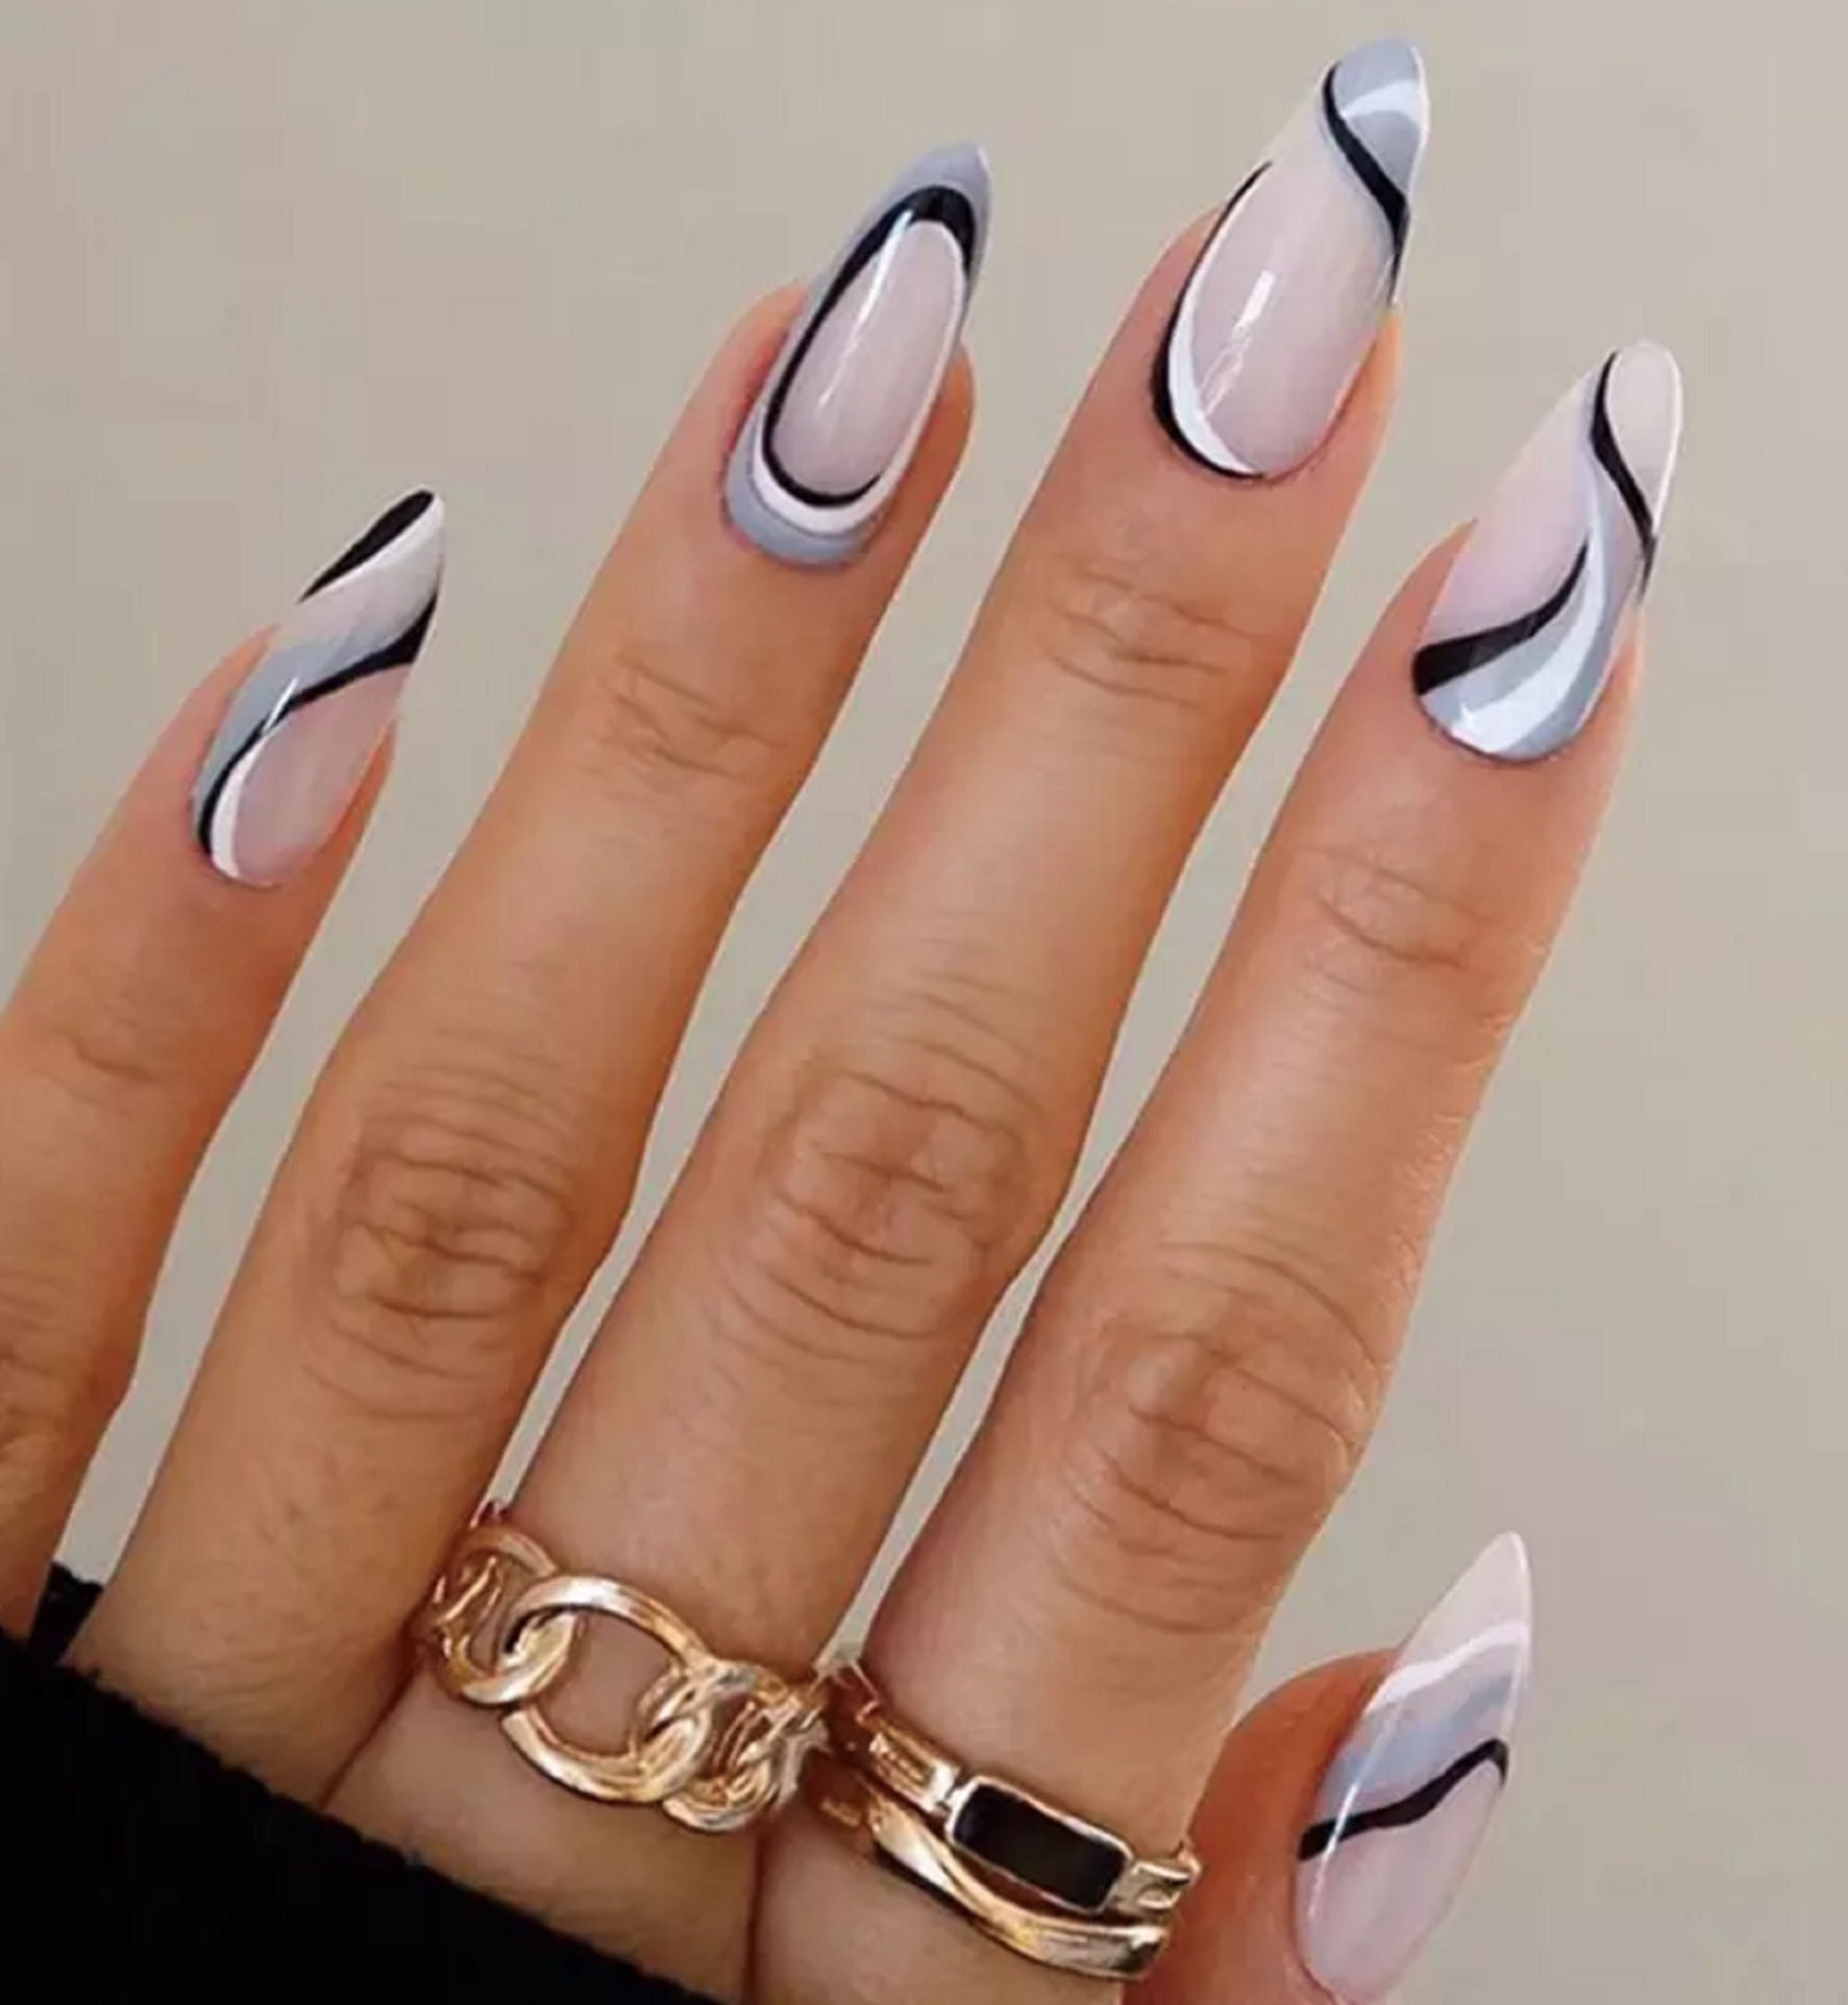 Nail Inspo 🖤🤍 | Black and White French Tips | Gallery posted by Katelin  ◡̈ | Lemon8